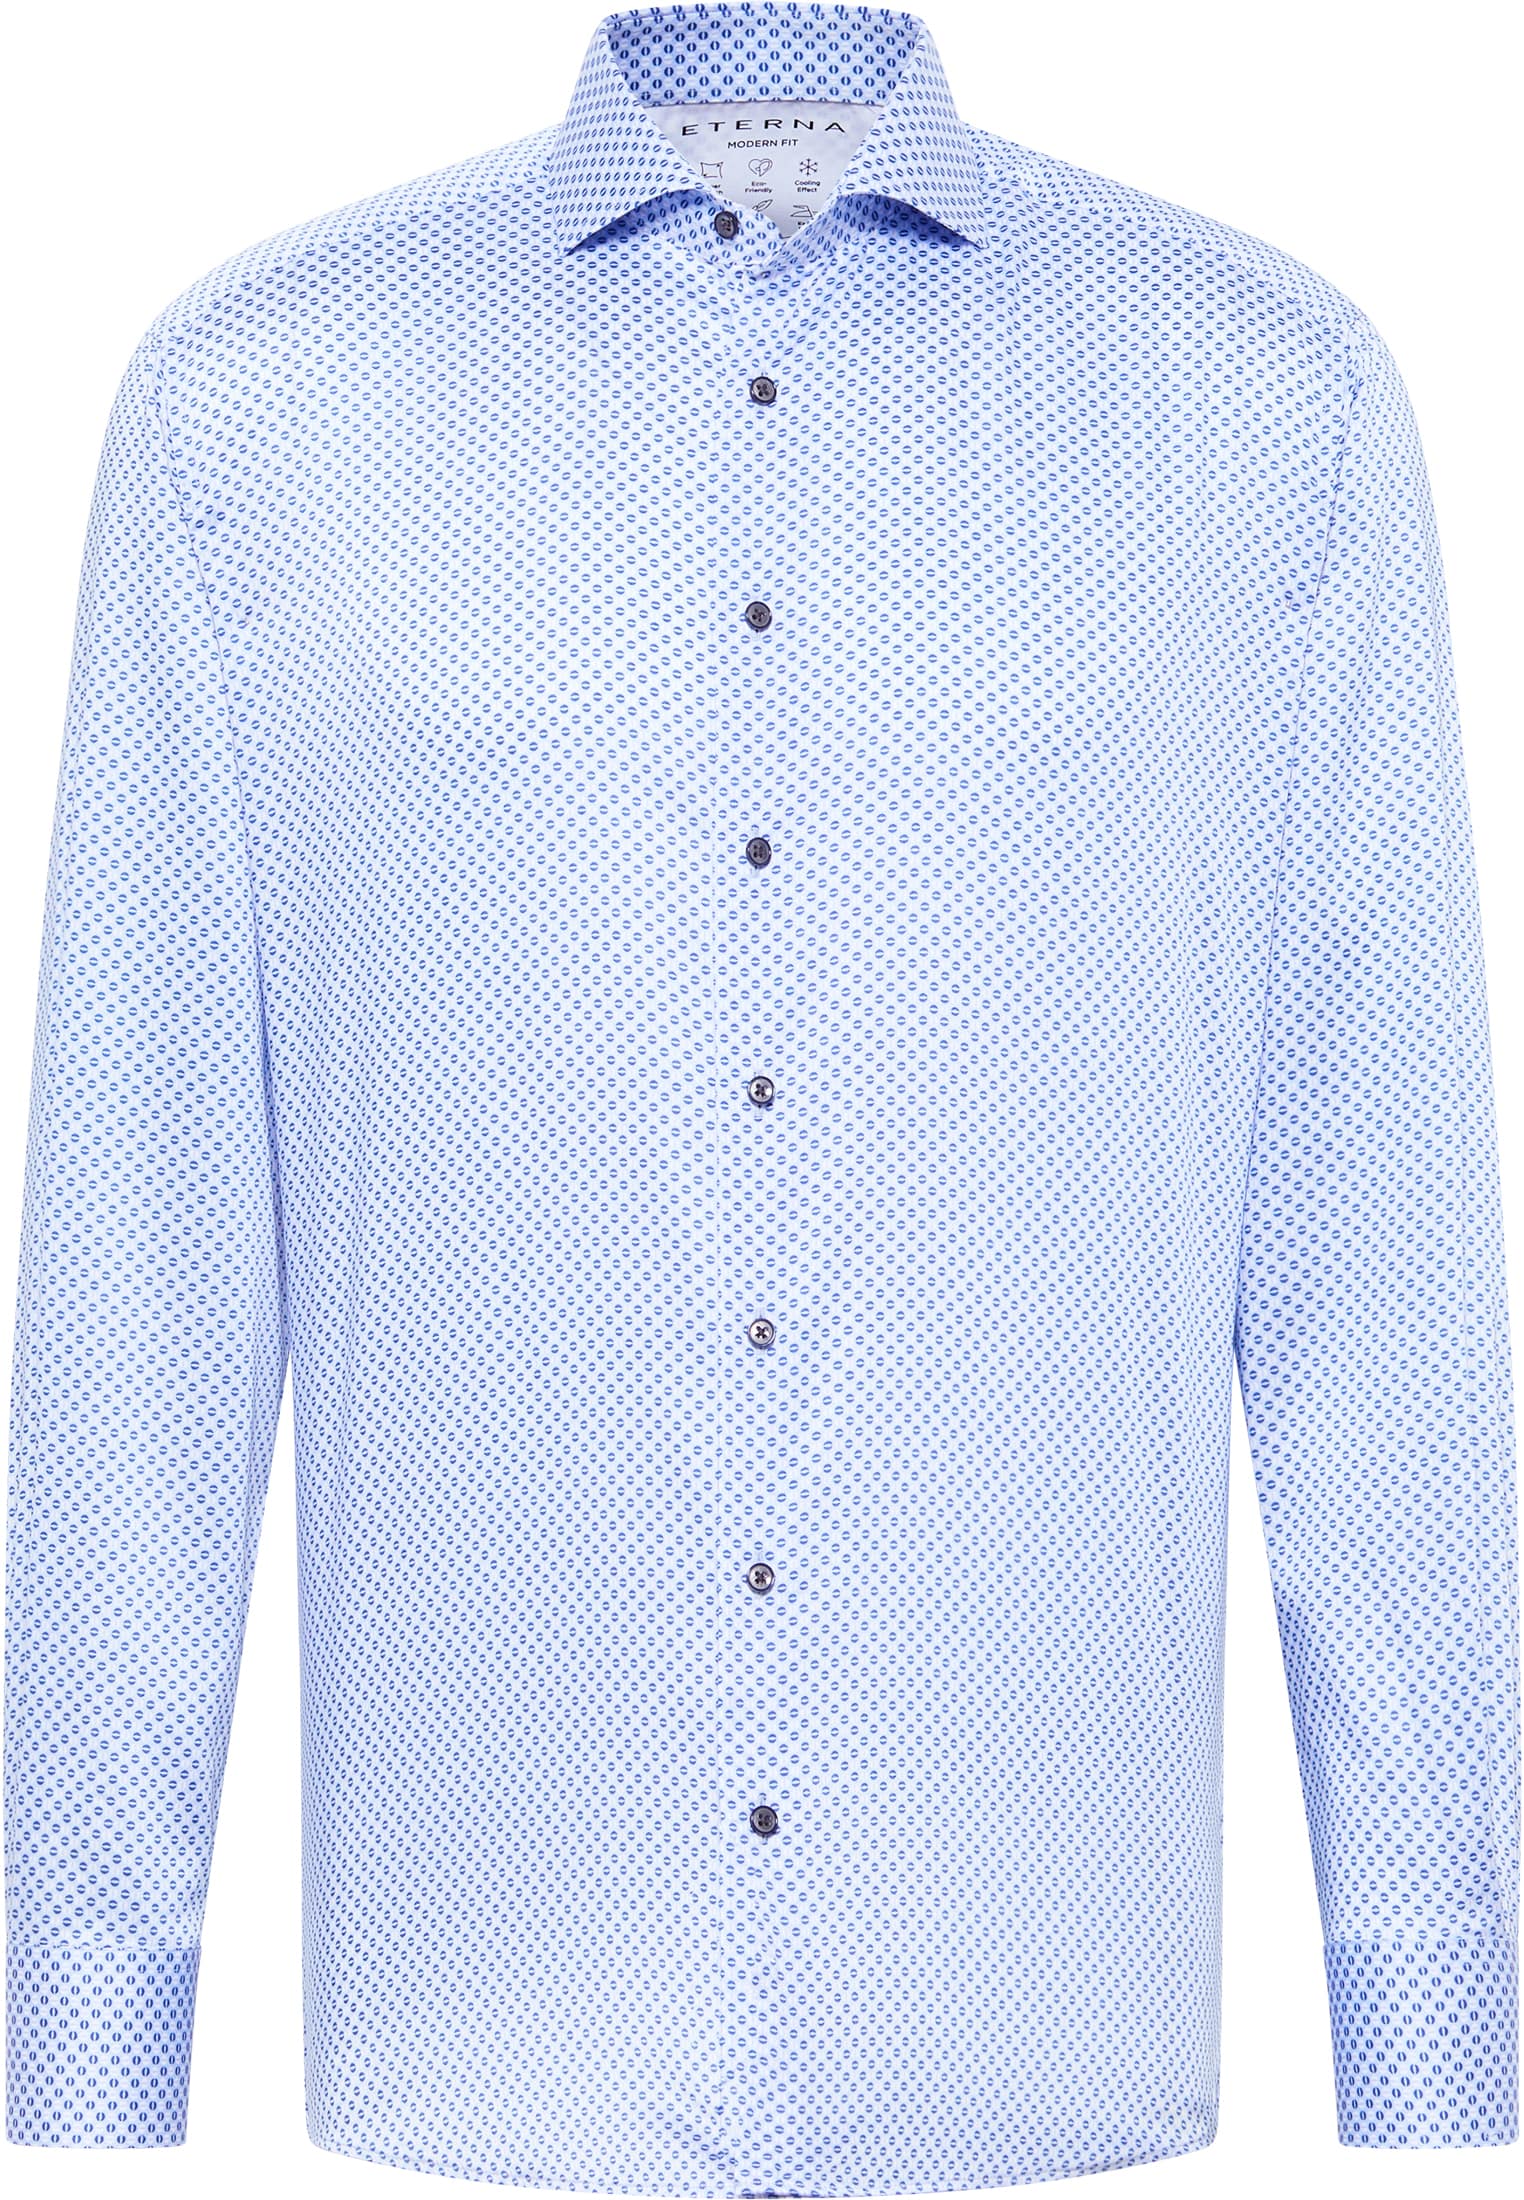 MODERN FIT Performance Shirt in blue printed